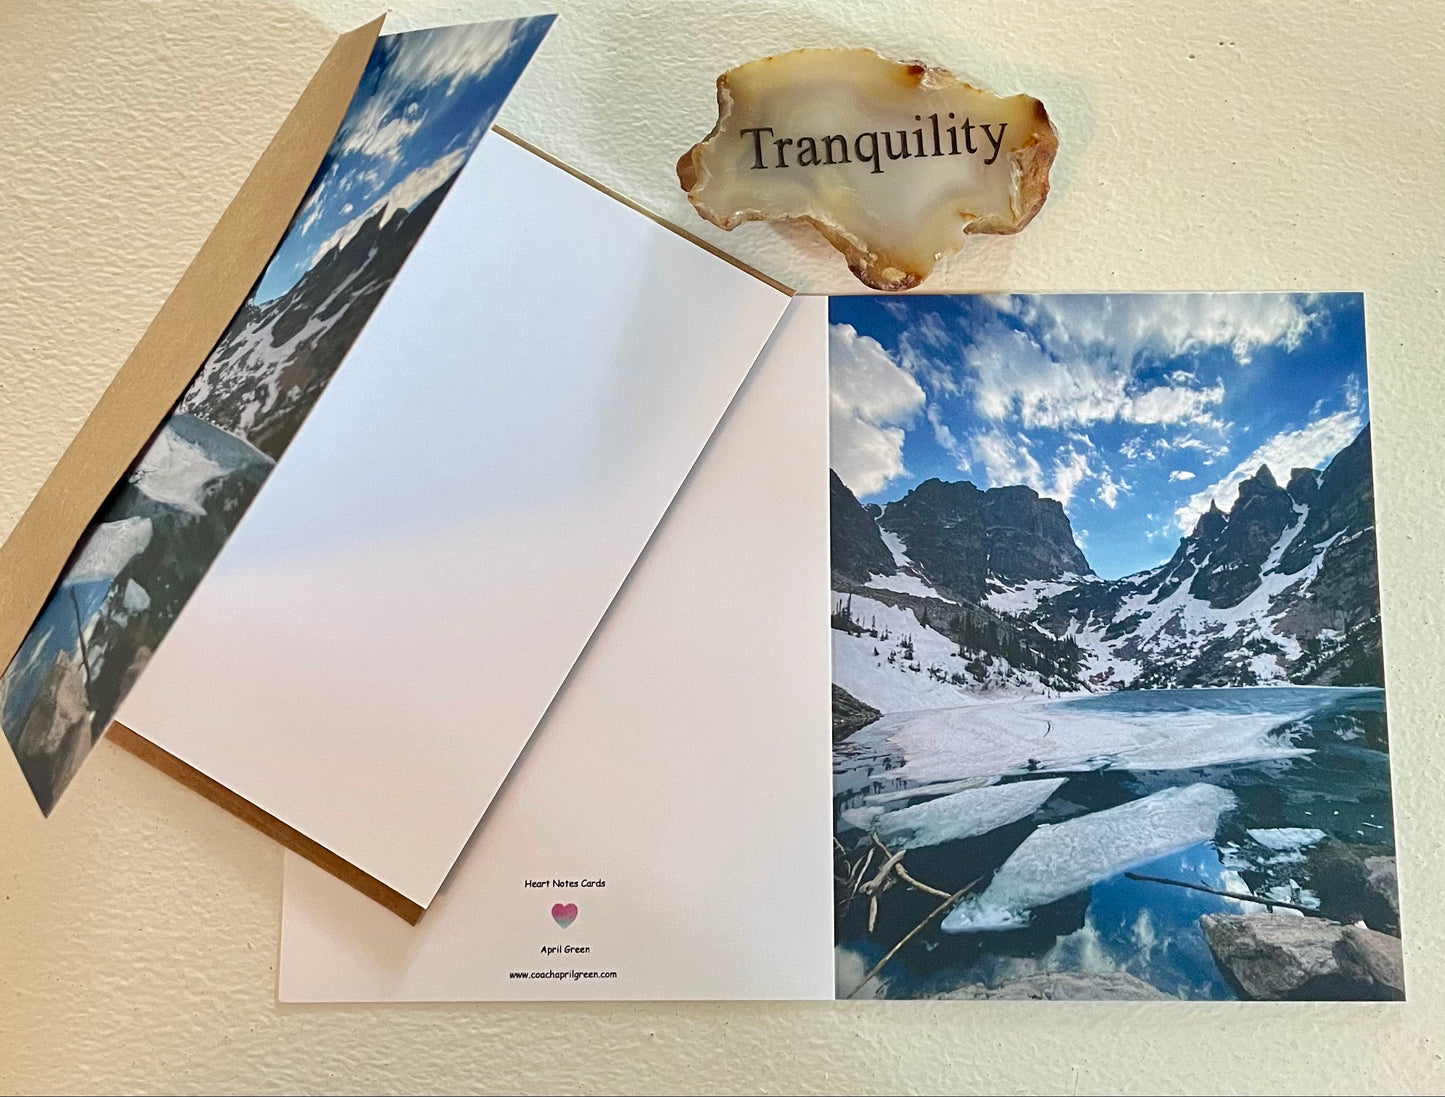 Emerald Lake Rocky Mountain National Park Single Original Photography Greeting Card with Envelope